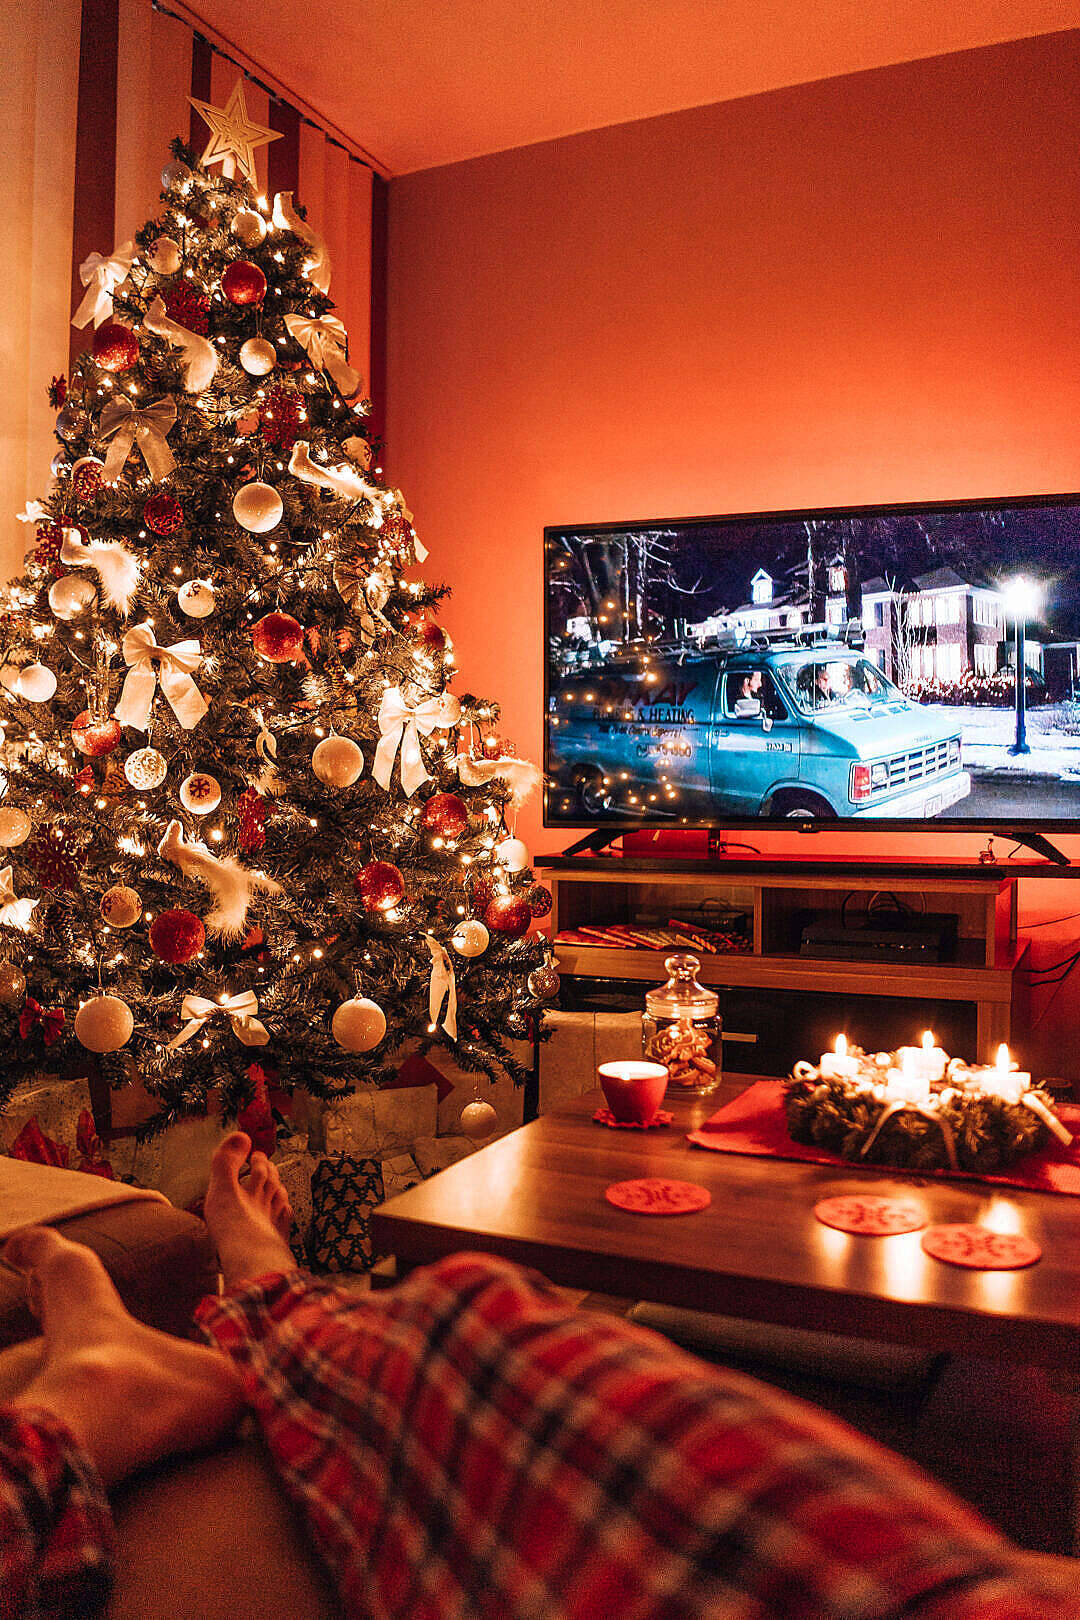 Living Room With Pretty Christmas Decorations